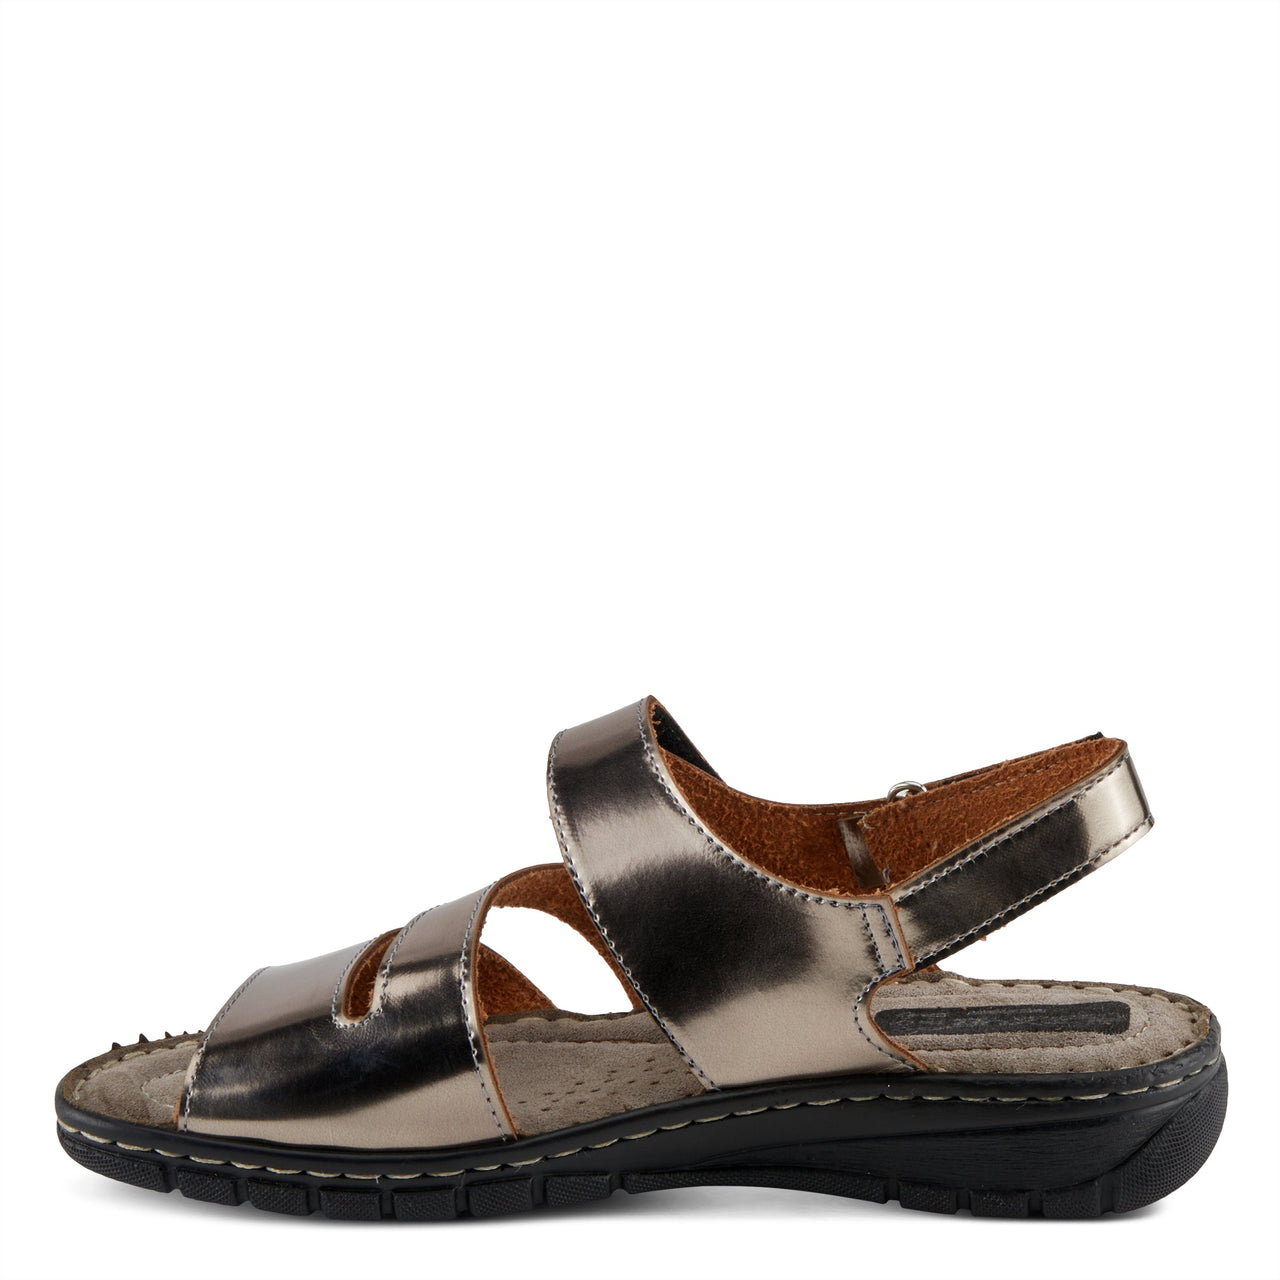 Beautiful Spring Step Shoes Flexus Maera L070 Sandal with supportive design and comfortable fit for all-day wear